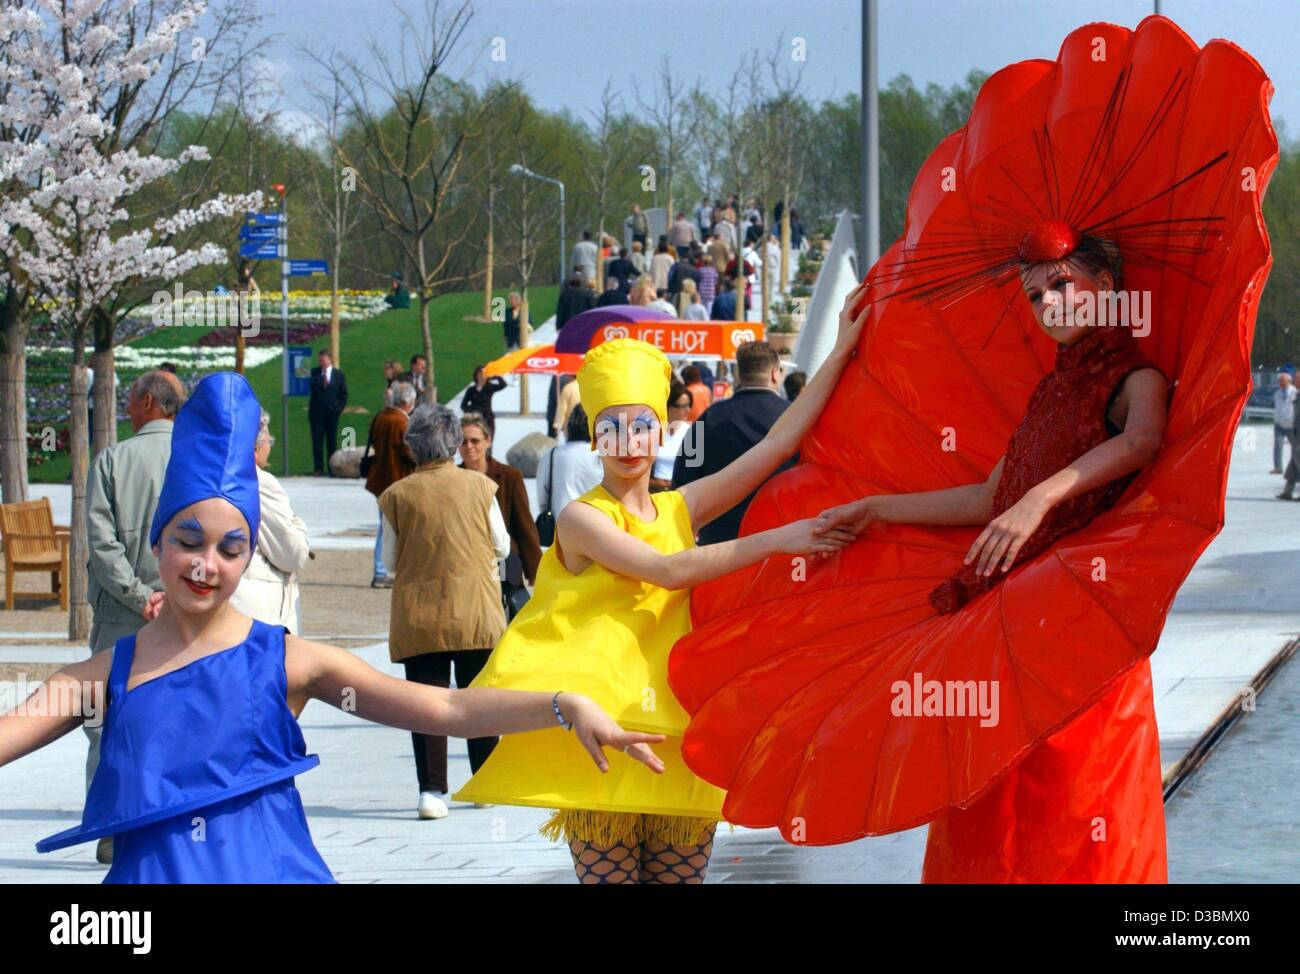 (dpa) - Young women dressed up as flowers and insects dance on the grounds of the International Horticultural Exhibition (IGA: Internationale Gartenbauausstellung), Rostock, Germany, 25 April 2003. The IGA opened on 25 April and will run through to 12 October 2003. 23 countries present their Gardens Stock Photo